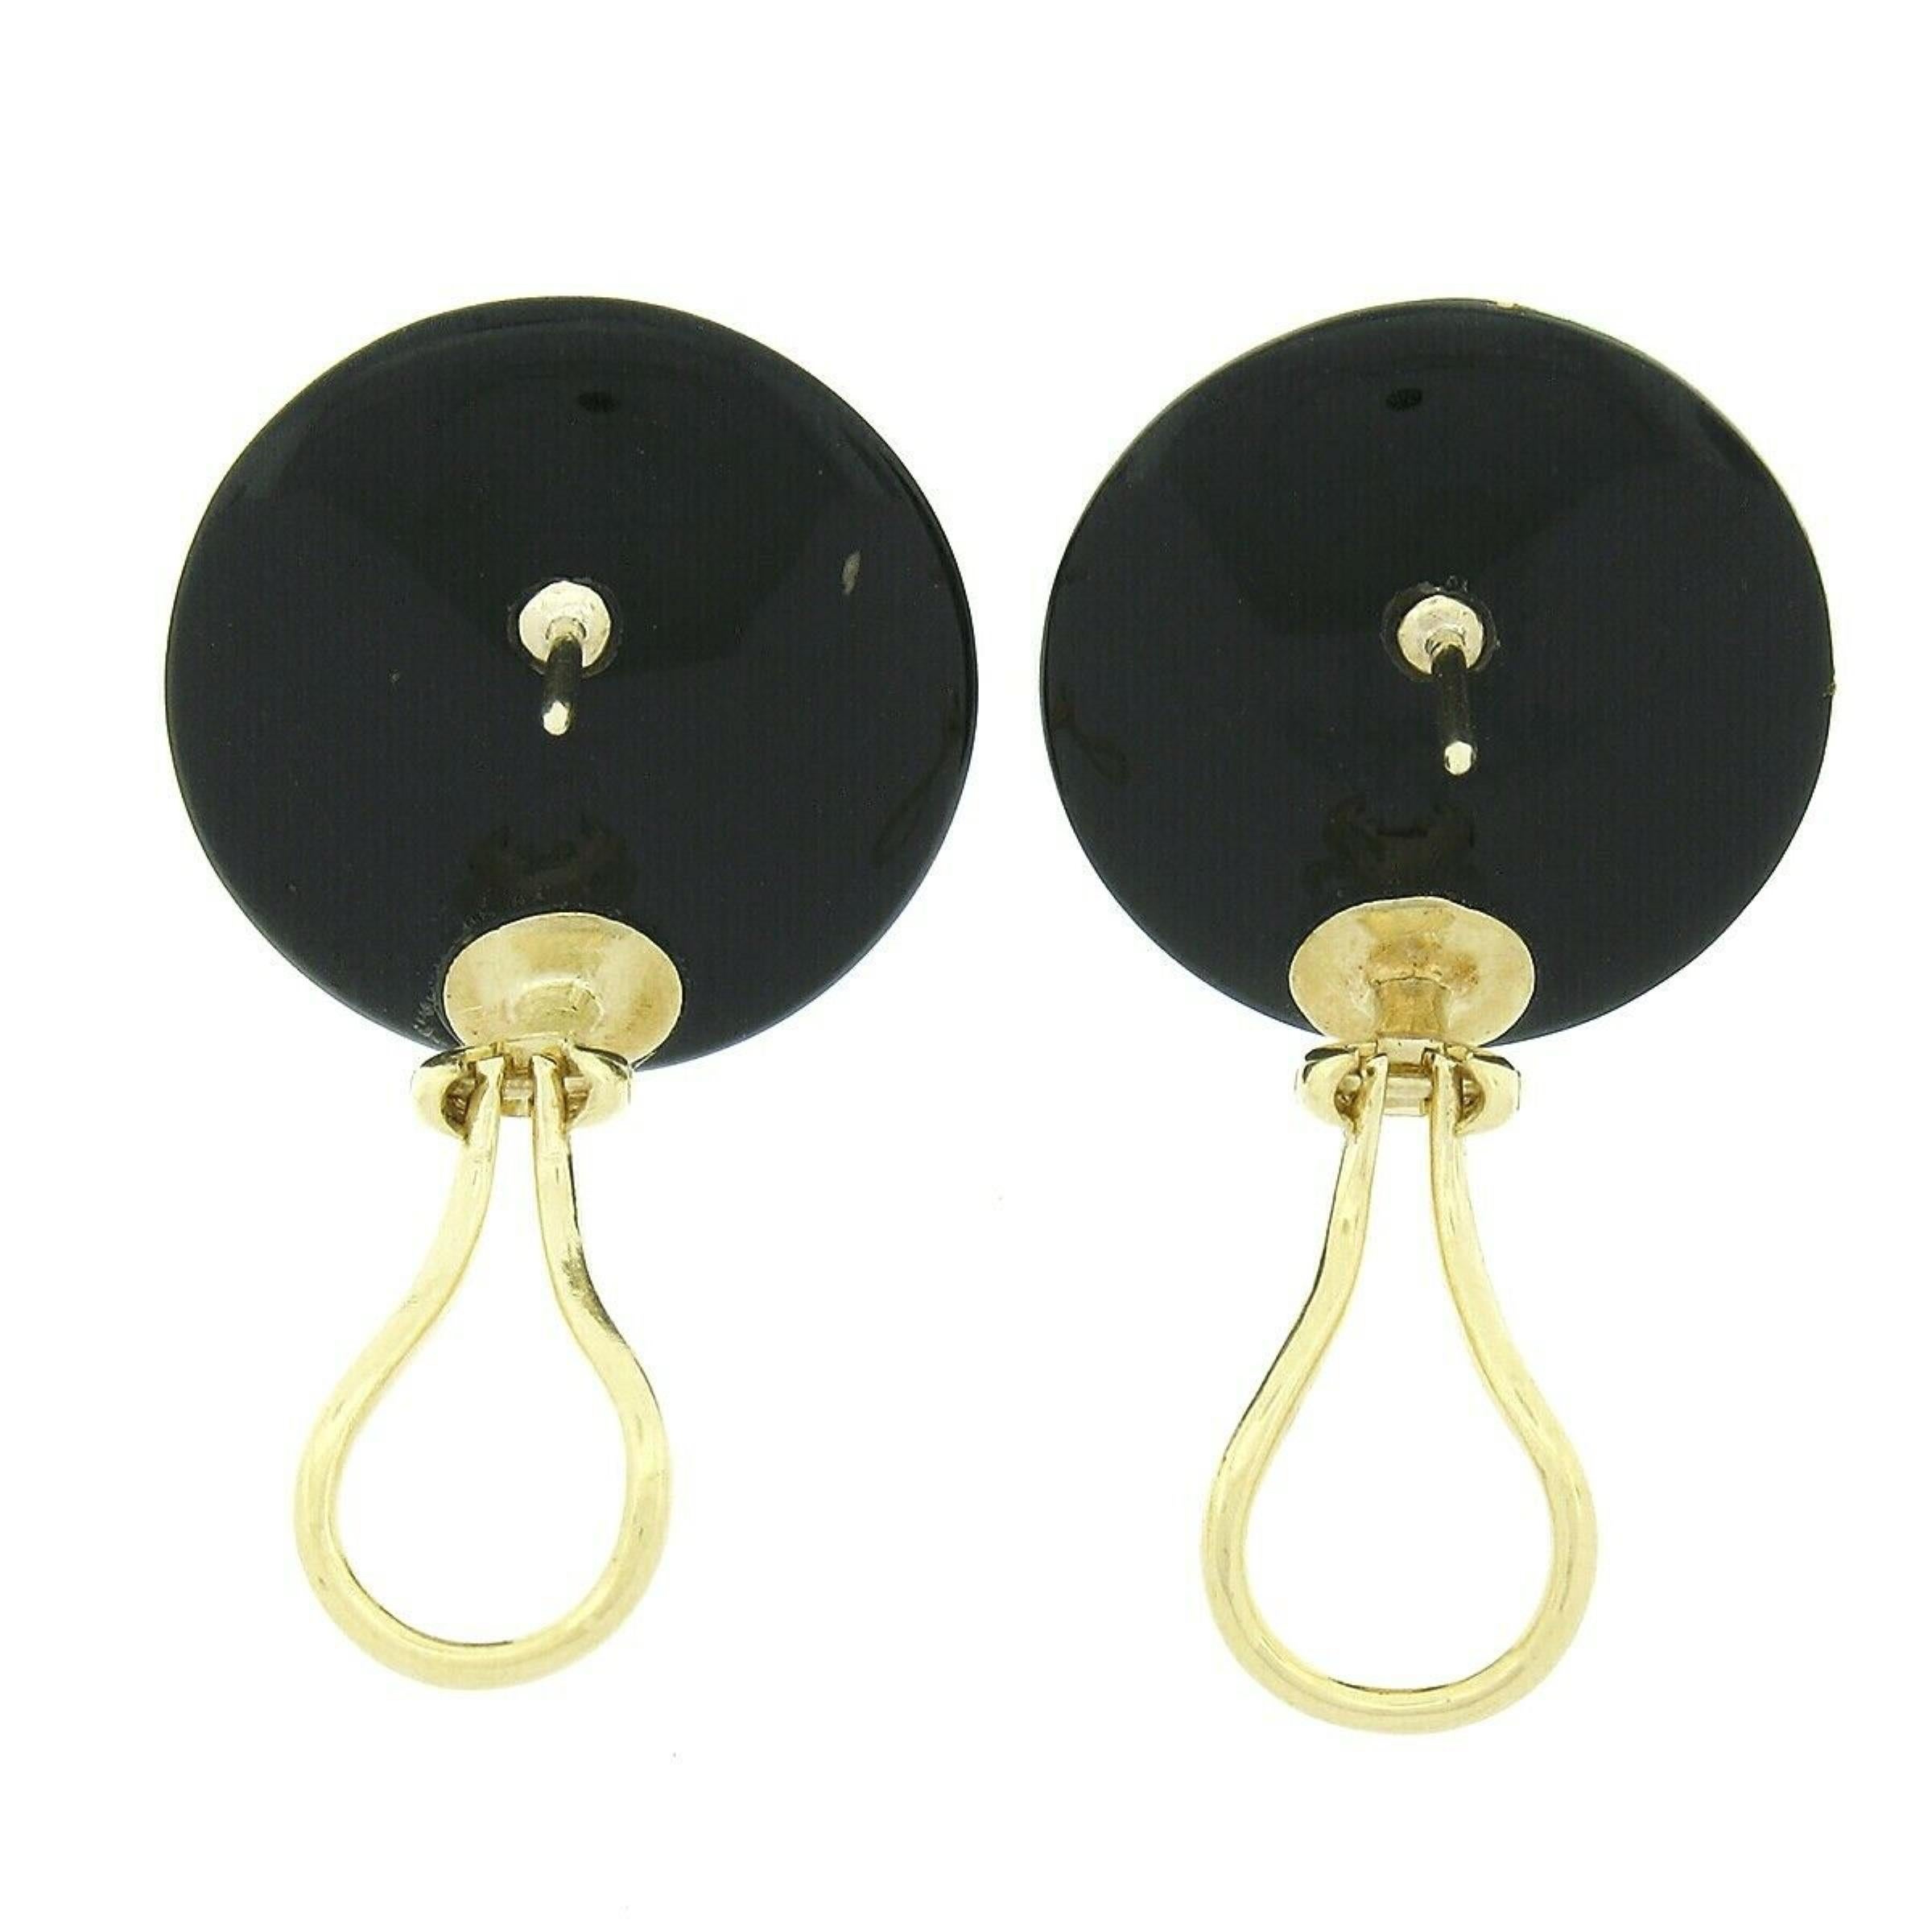 Vintage Tiffany & Co. 18k Gold Inlaid Opal on Black Onyx Large Button Earrings 1